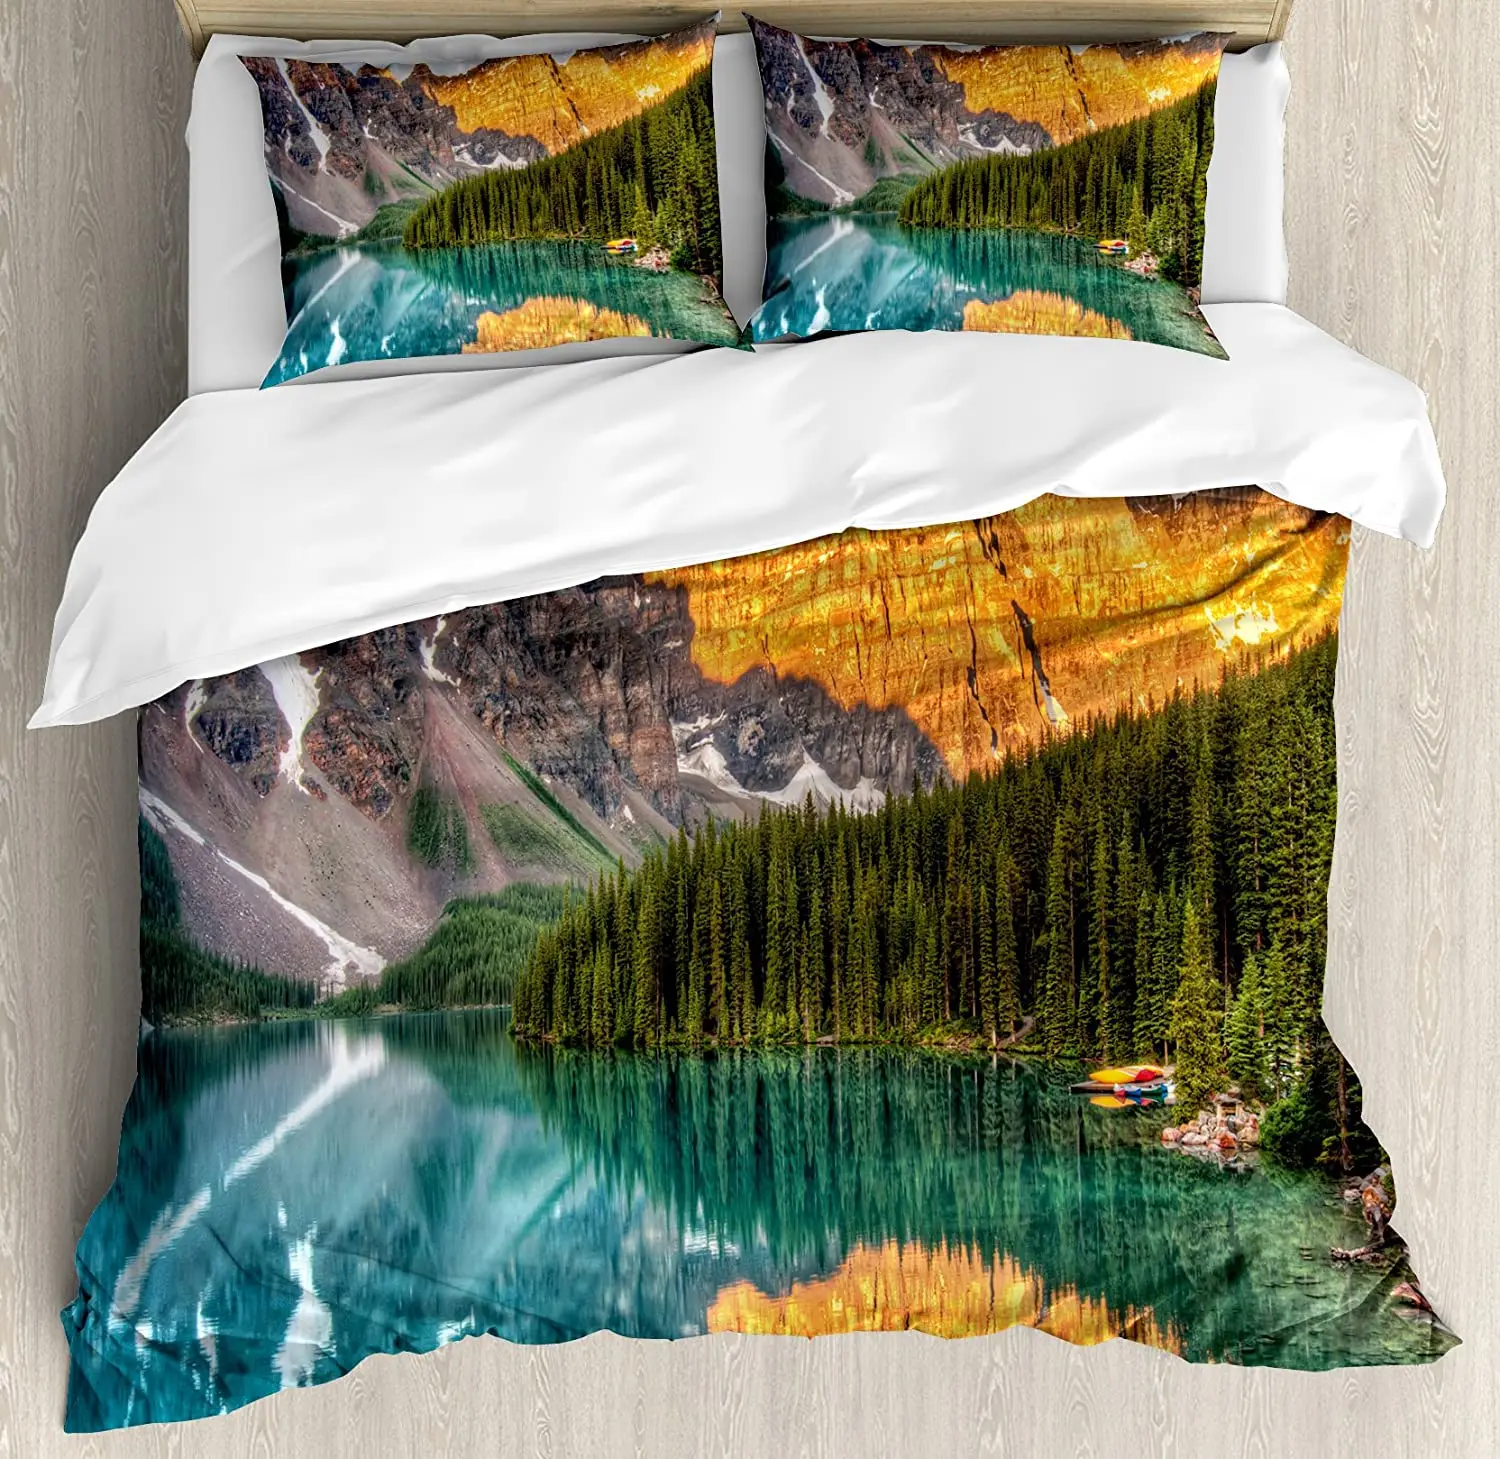 

Nature Bedding Set For Bedroom Bed Home Moraine Lake Canadian Mountain Range with Creek Pi Duvet Cover Quilt Cover Pillowcase